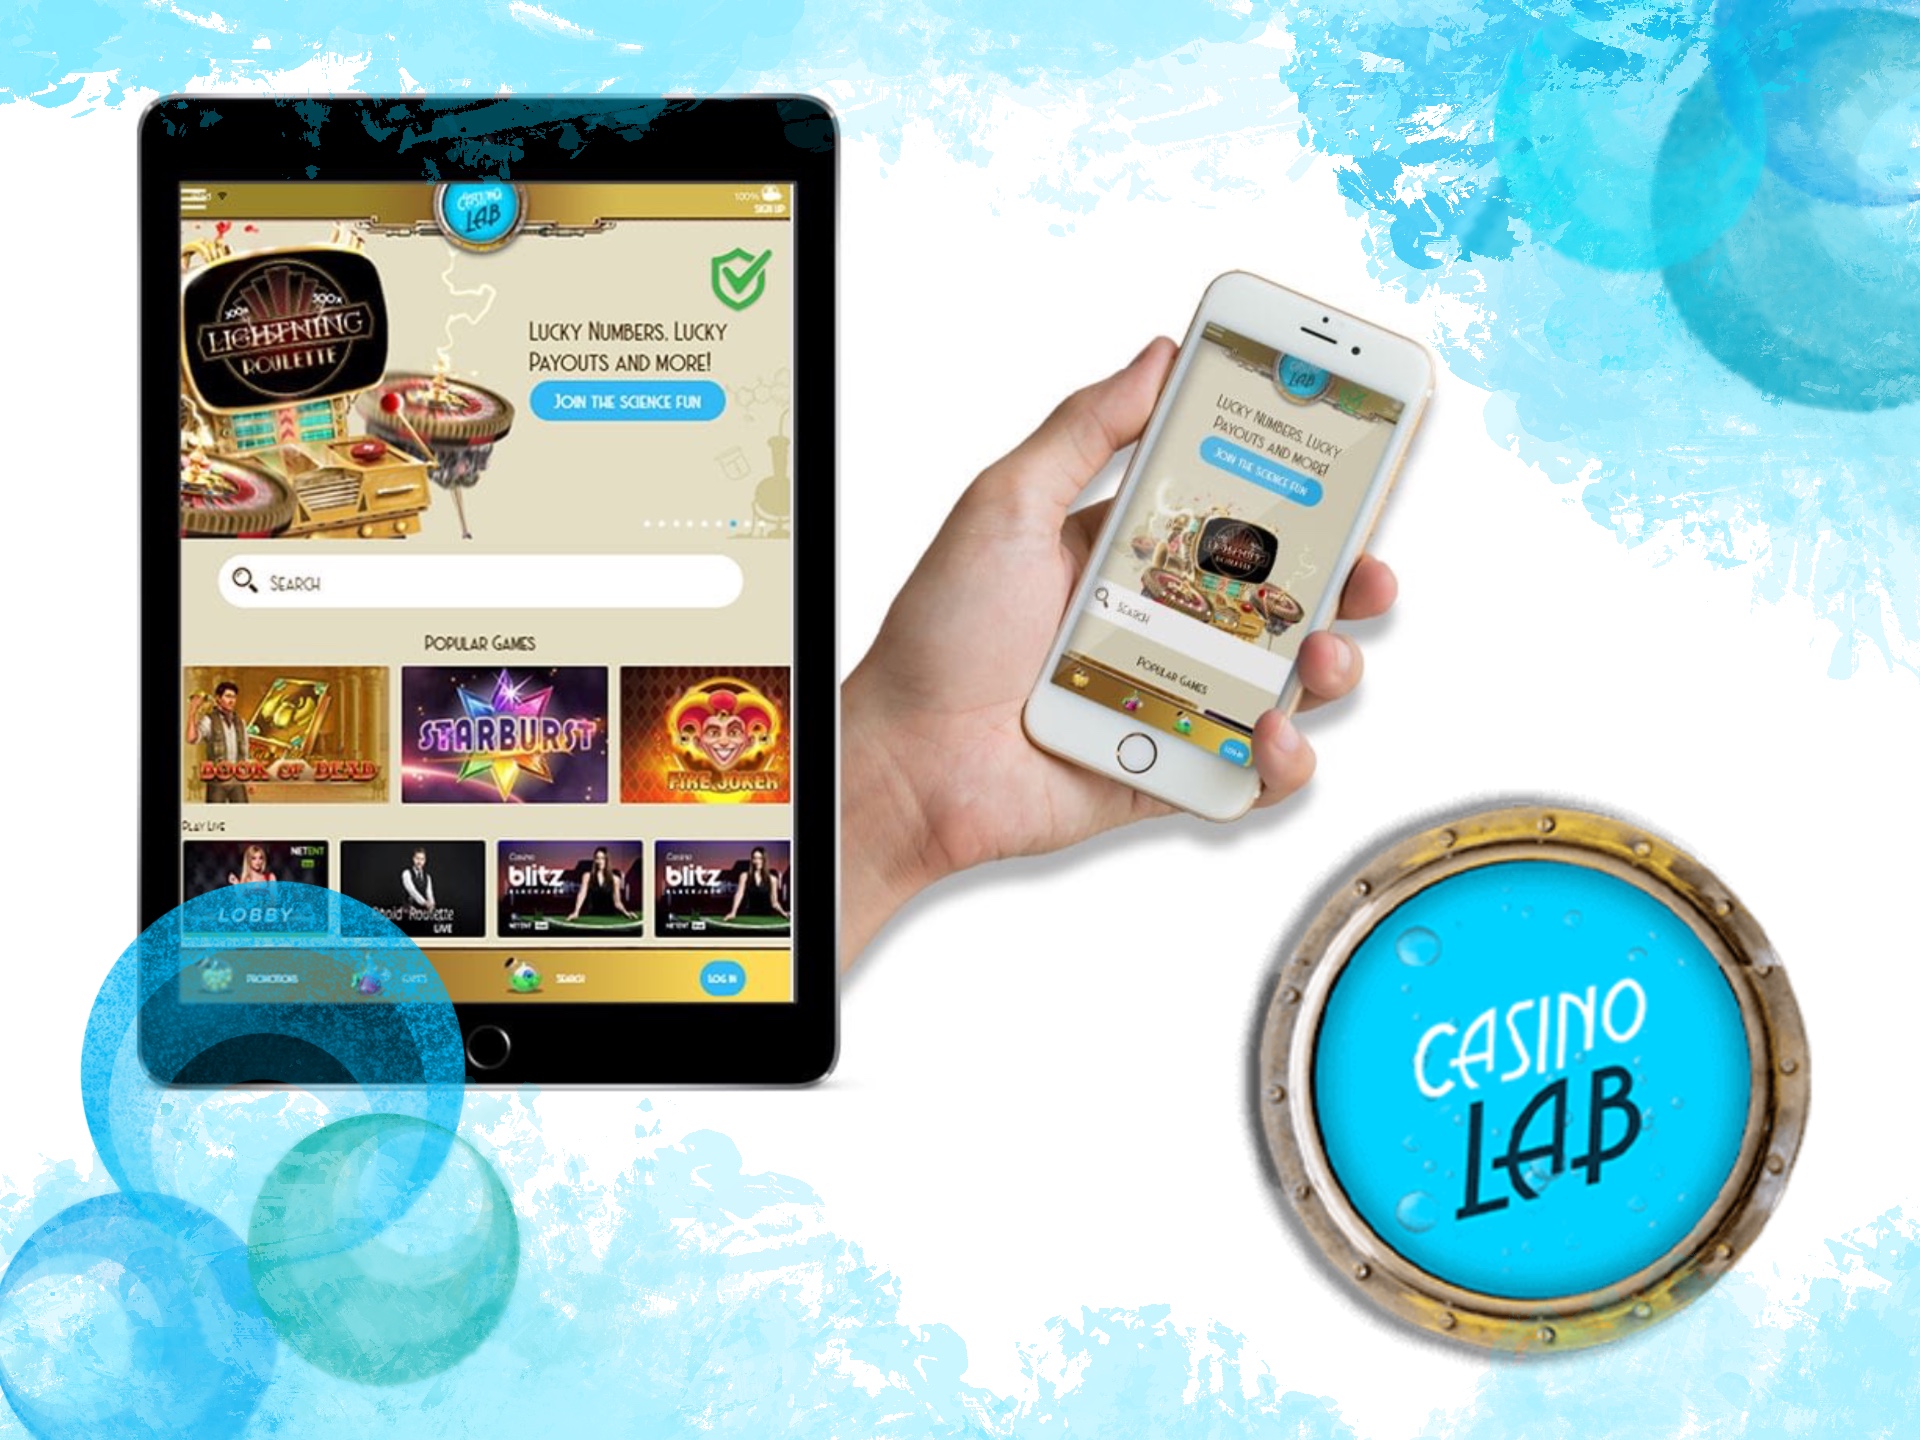 If you want to find the best slots you should register at Casino Lab.